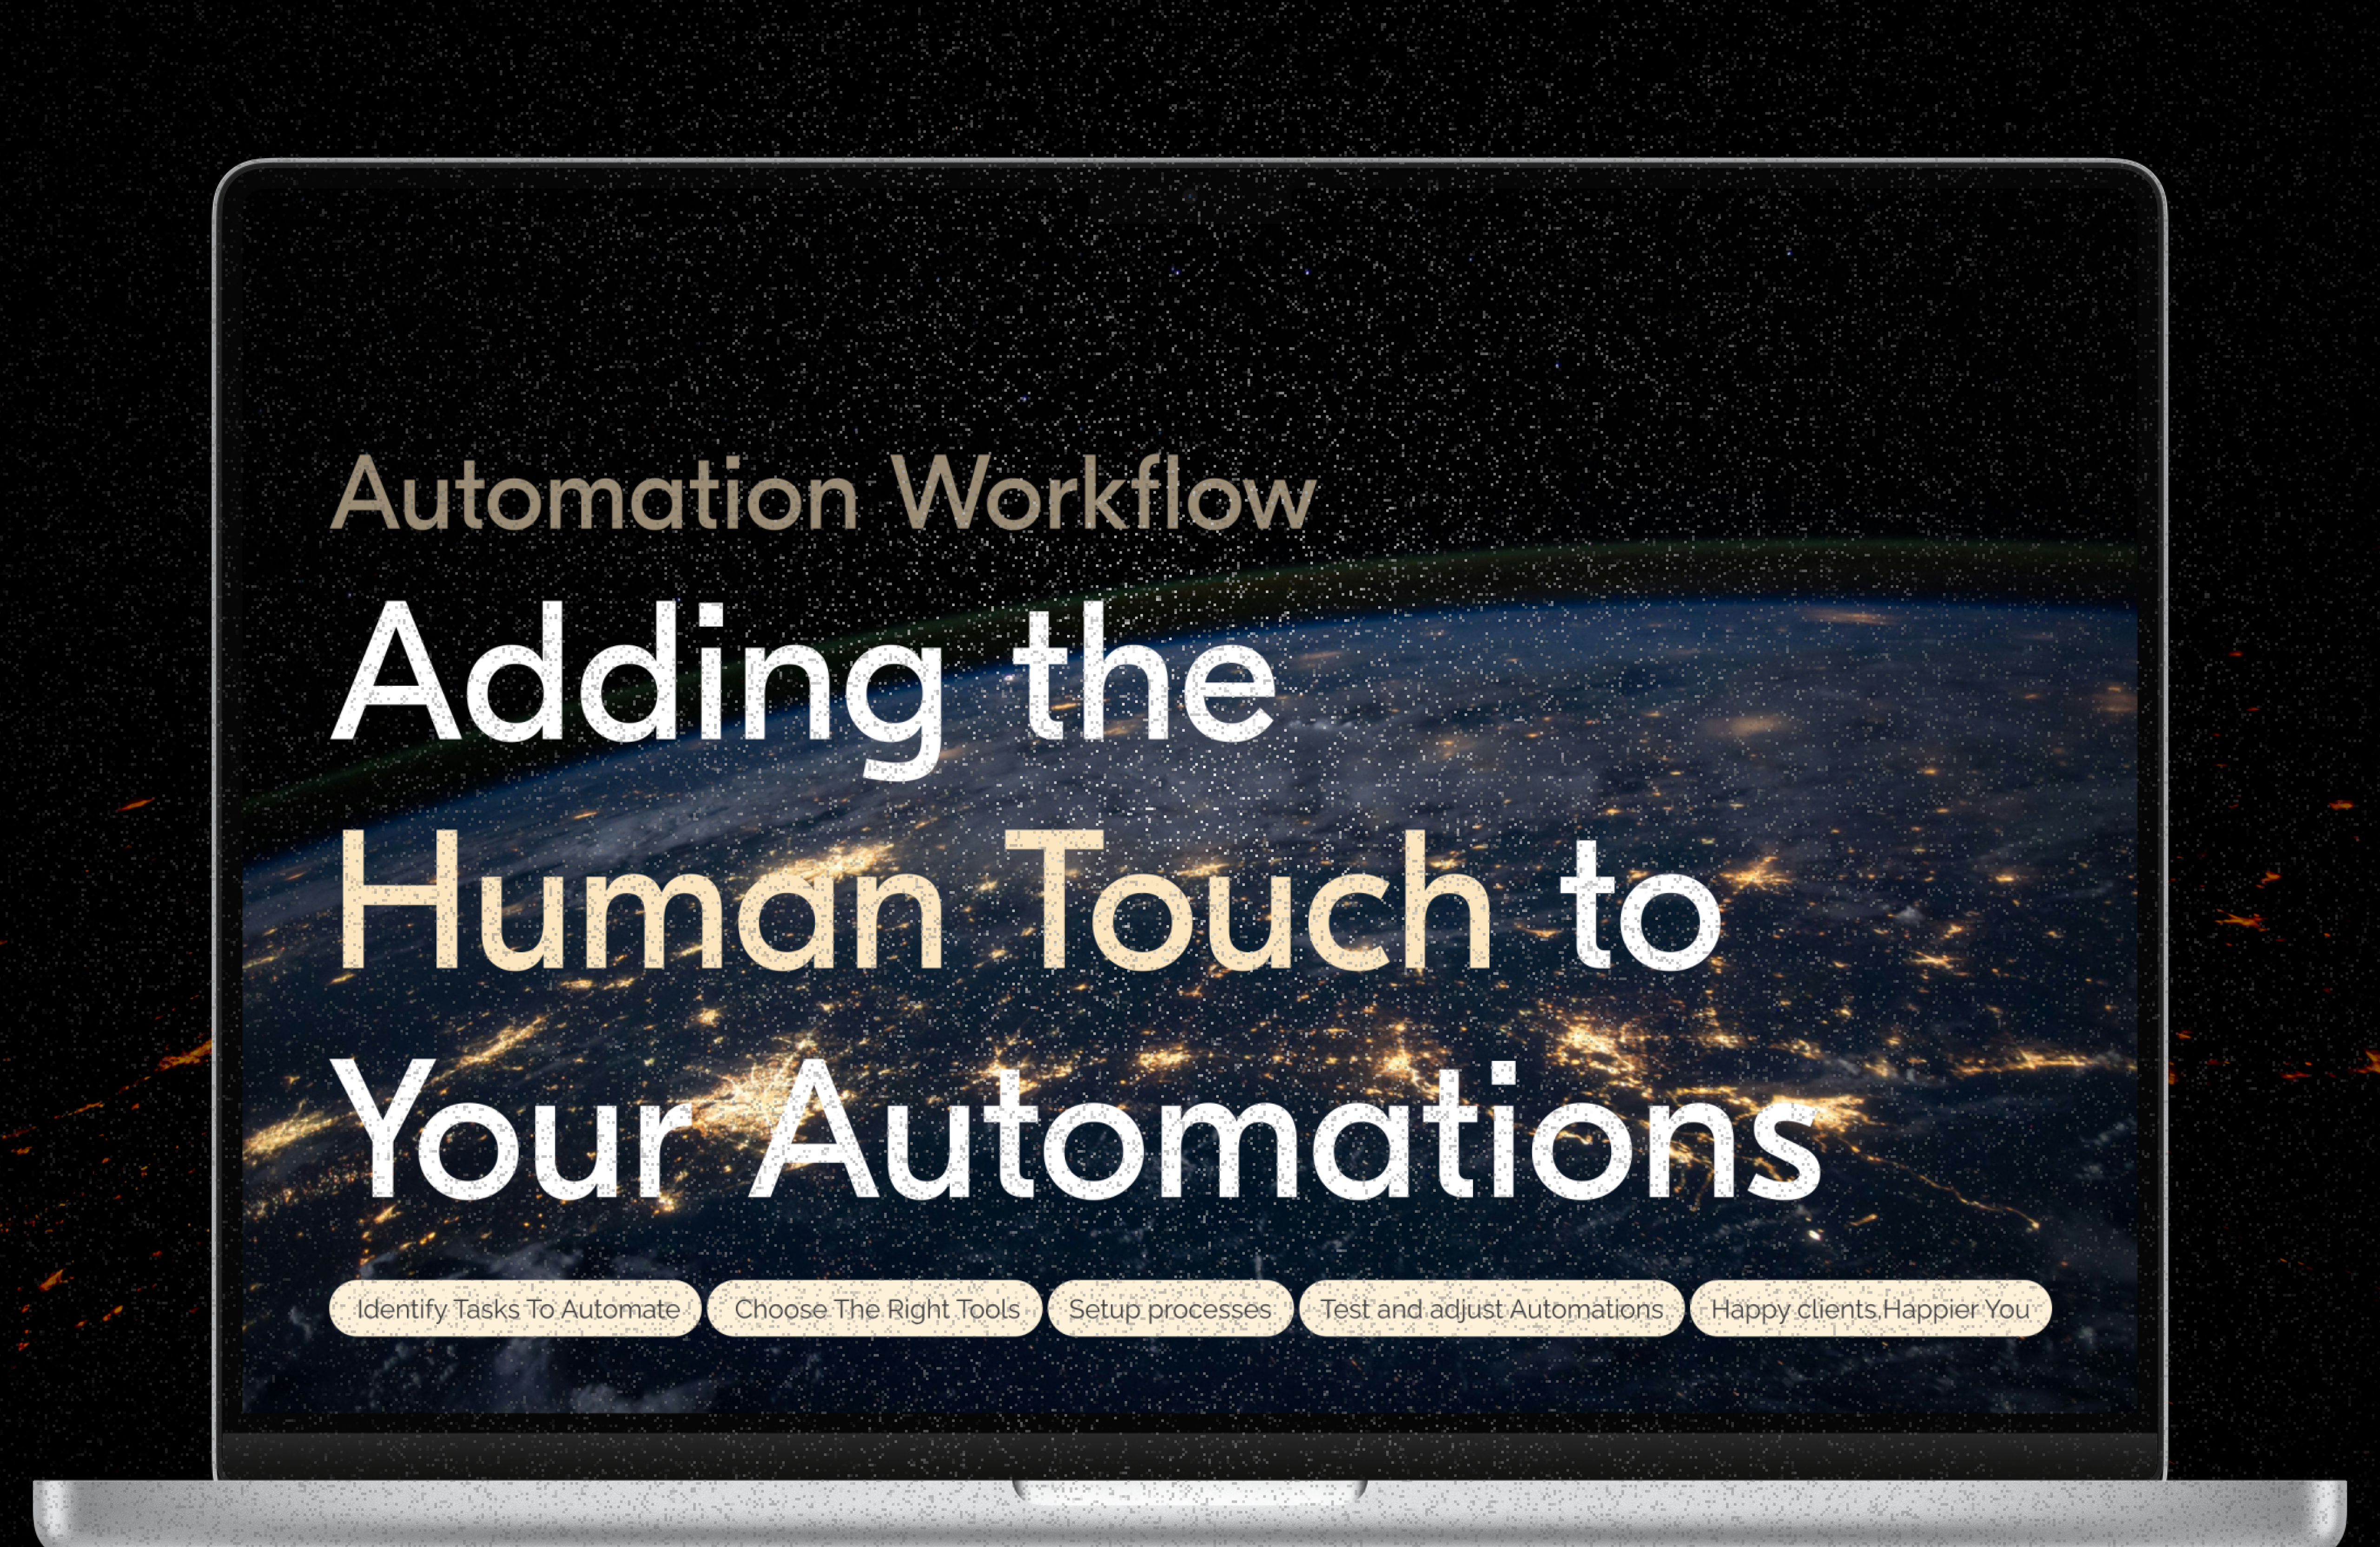 Have A seamless Automation for your business needs